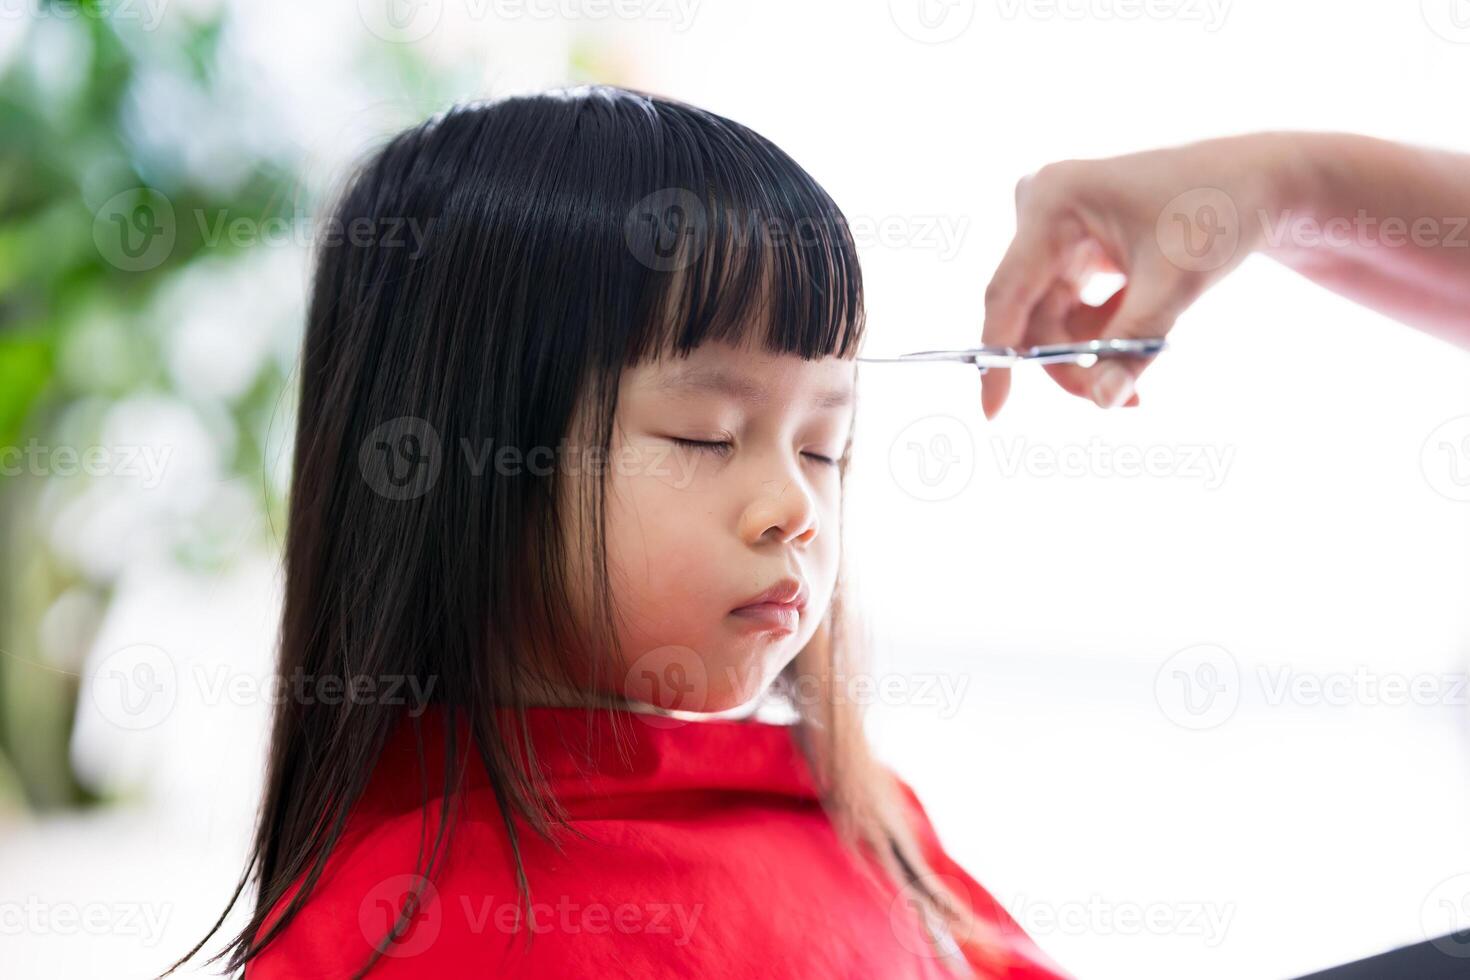 Asian girl is sitting and having her hair cut by barber, Child is wearing red hair cutting cape to prevent hair particles from sticking to her clothes and body, Kid sits silently with her eyes closed. photo